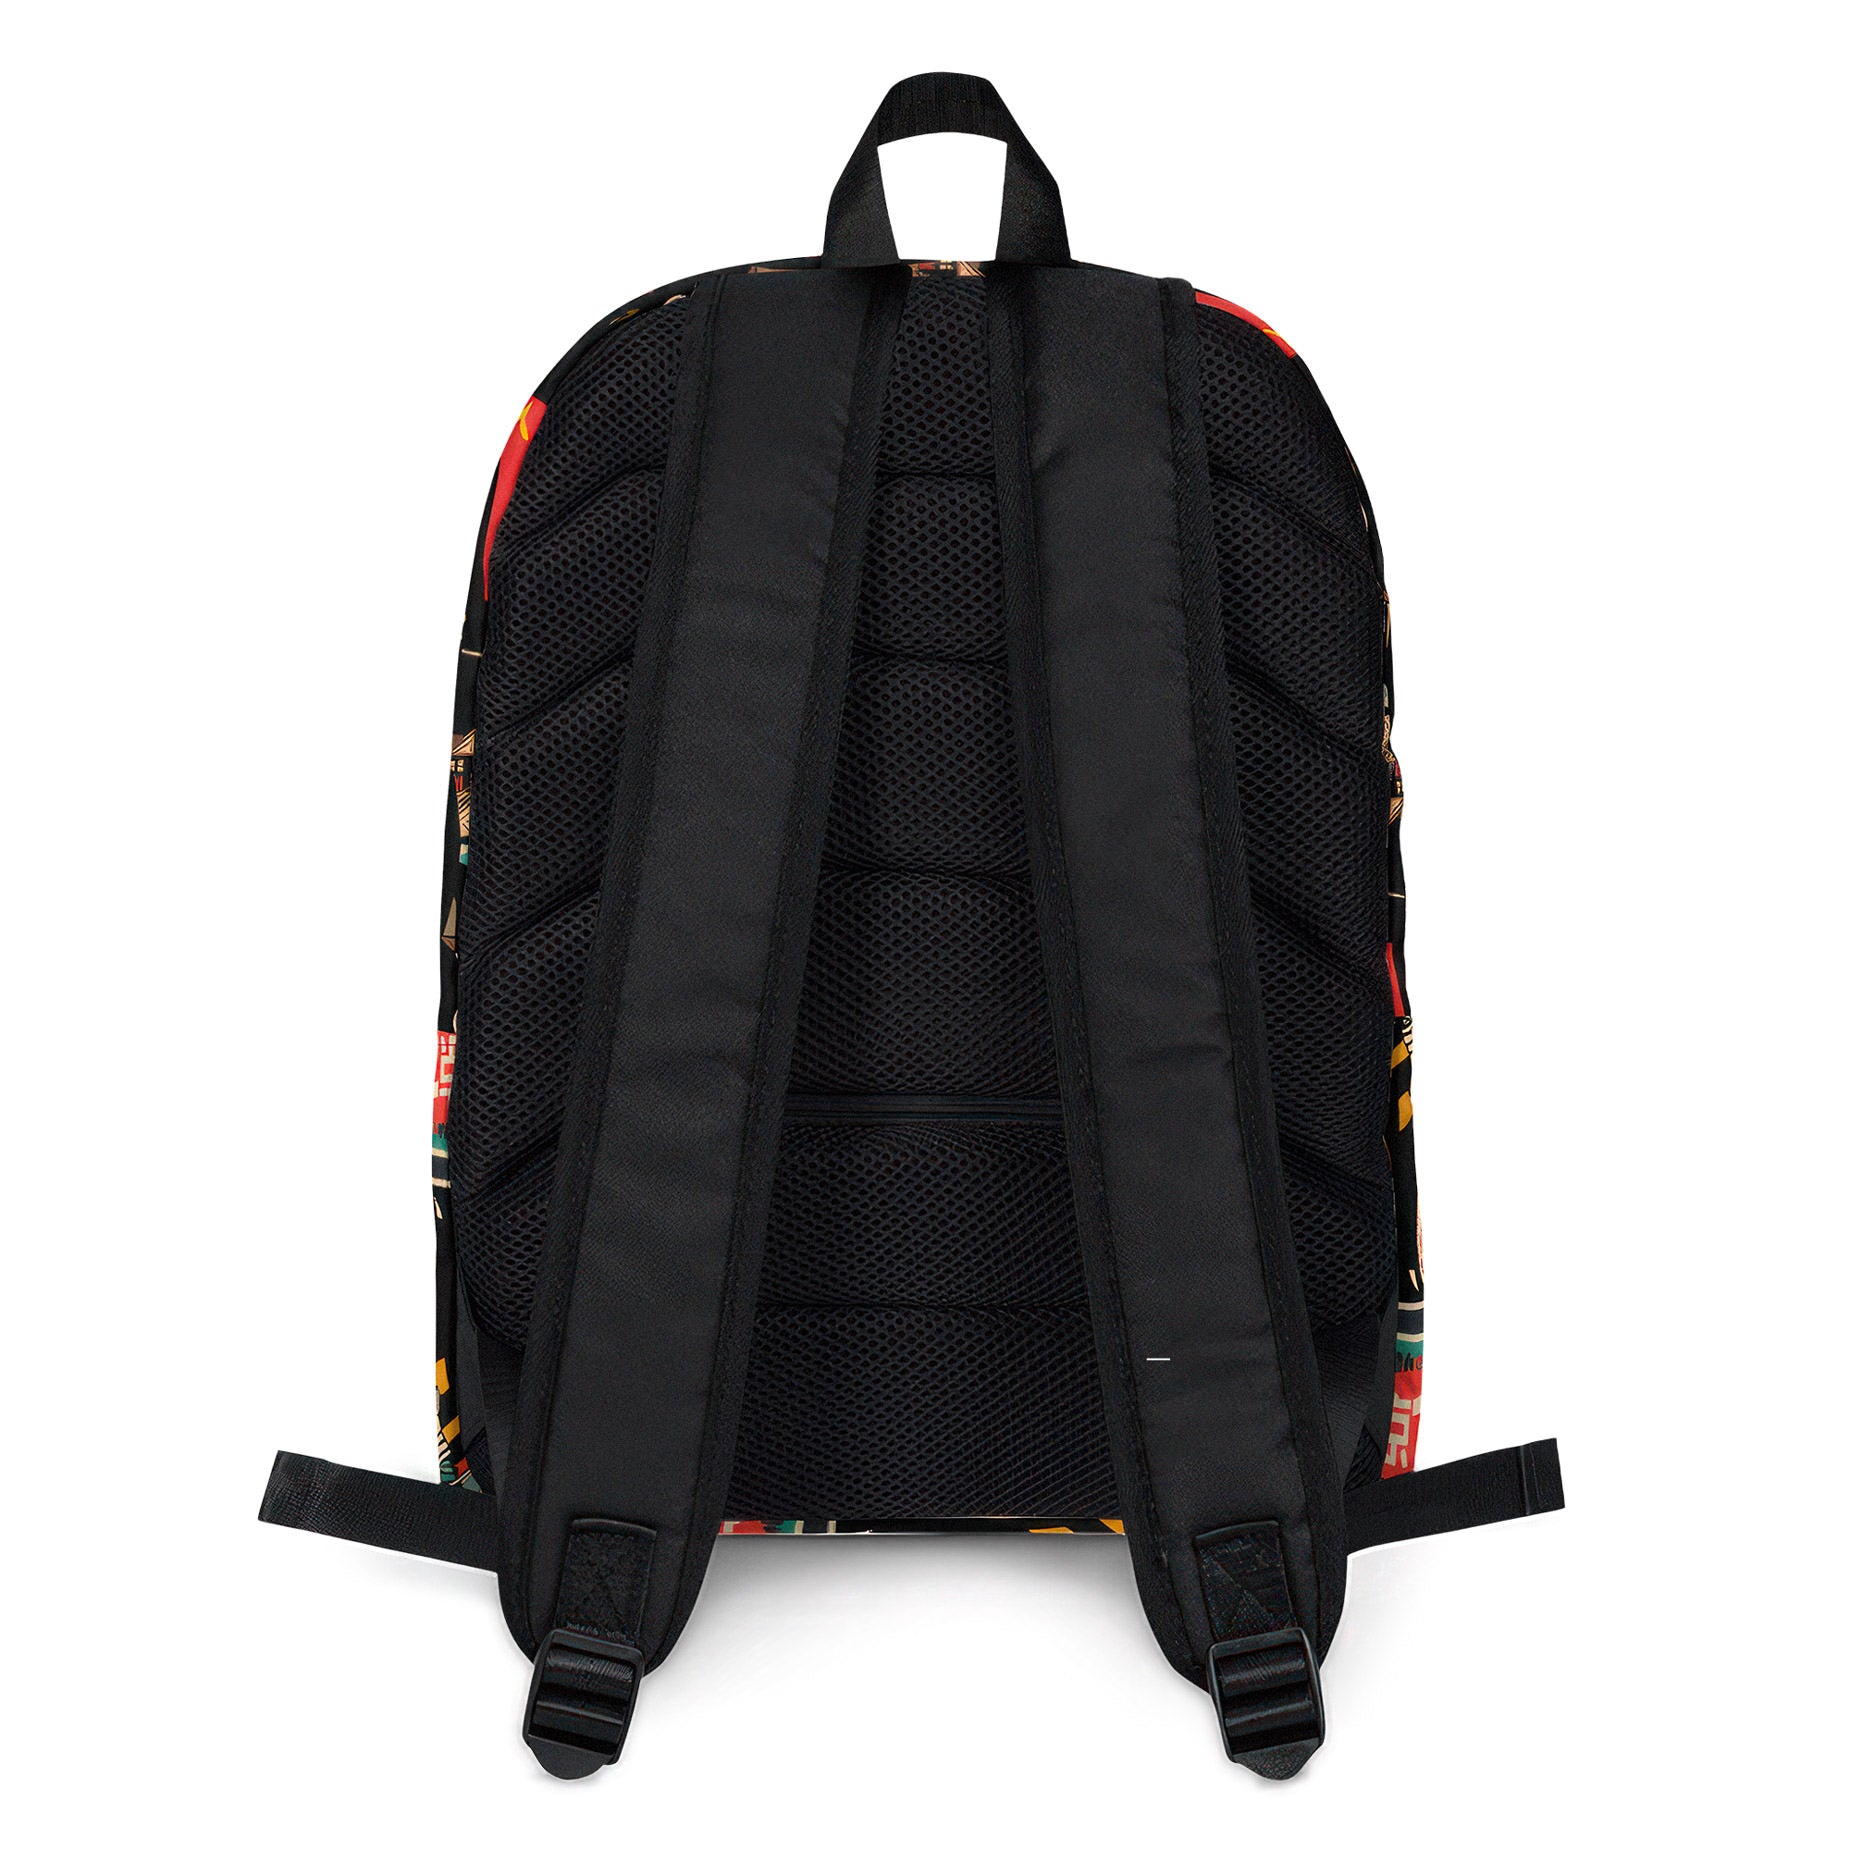 This medium size backpack is just what you need for daily use or sports activities. The pockets (including one for your laptop) give plenty of room for all your necessities, while the water resistant material will protect them from the weather. 